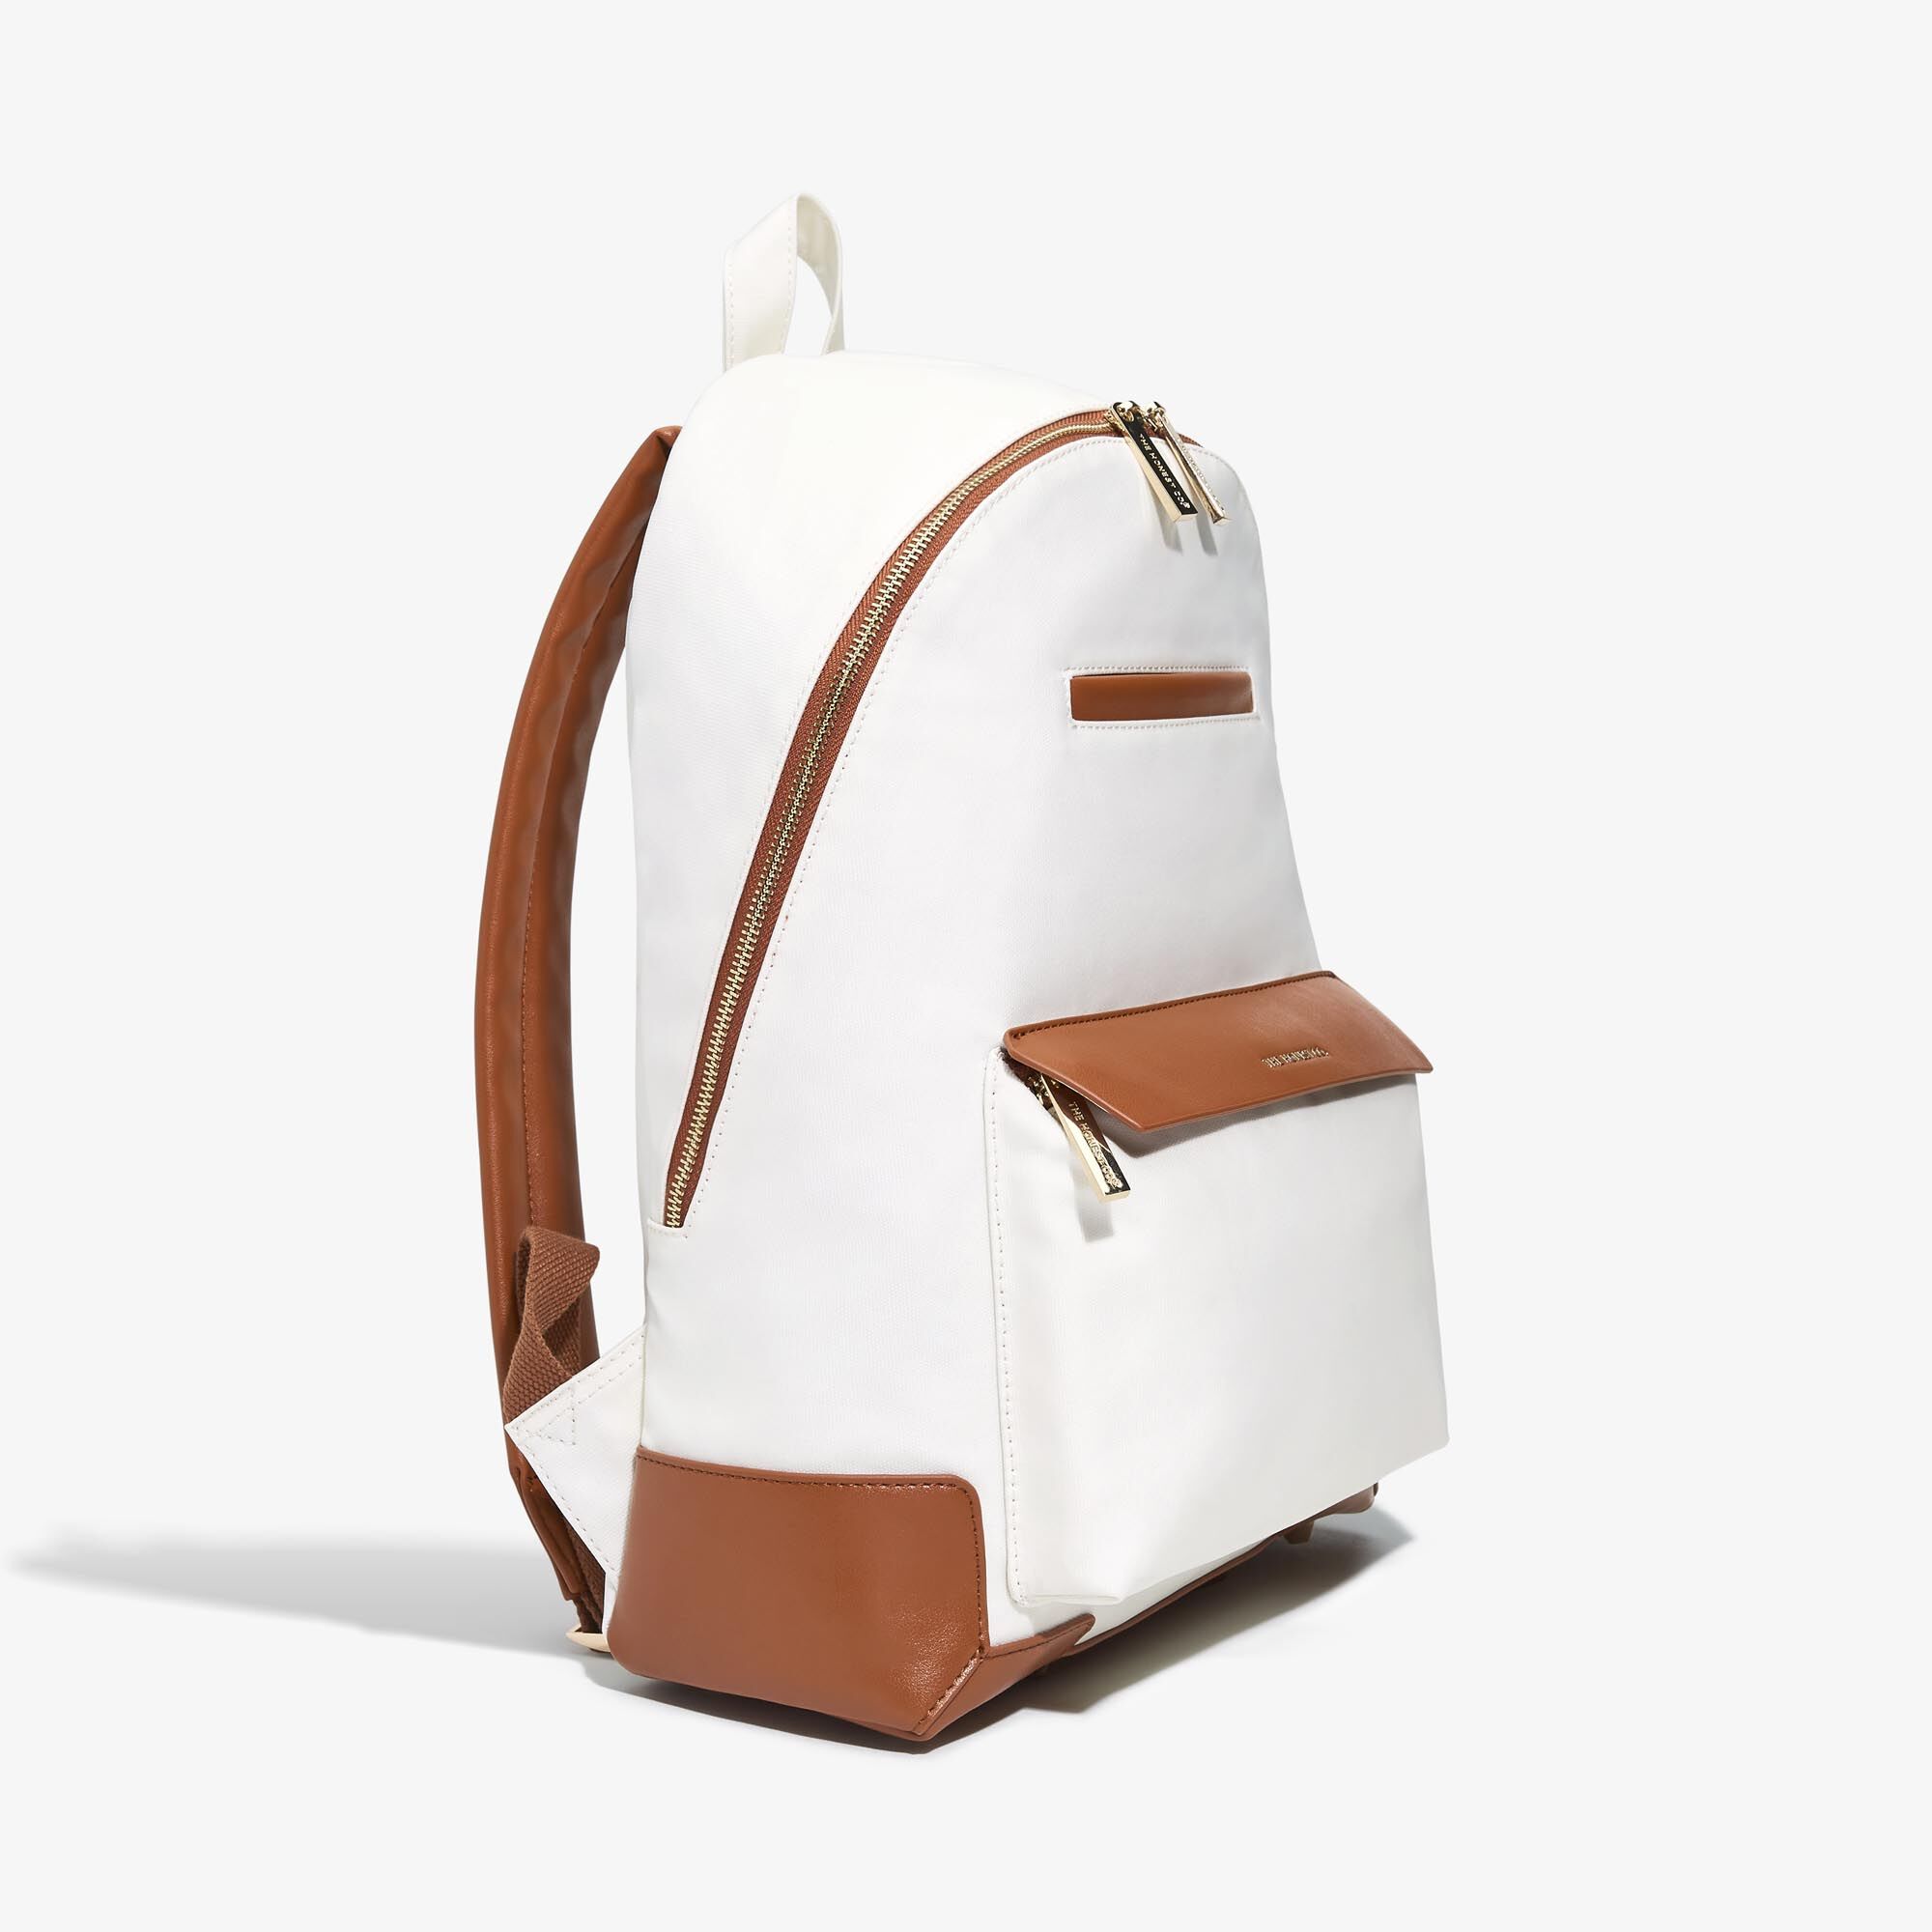 Women's Canvas Backpack